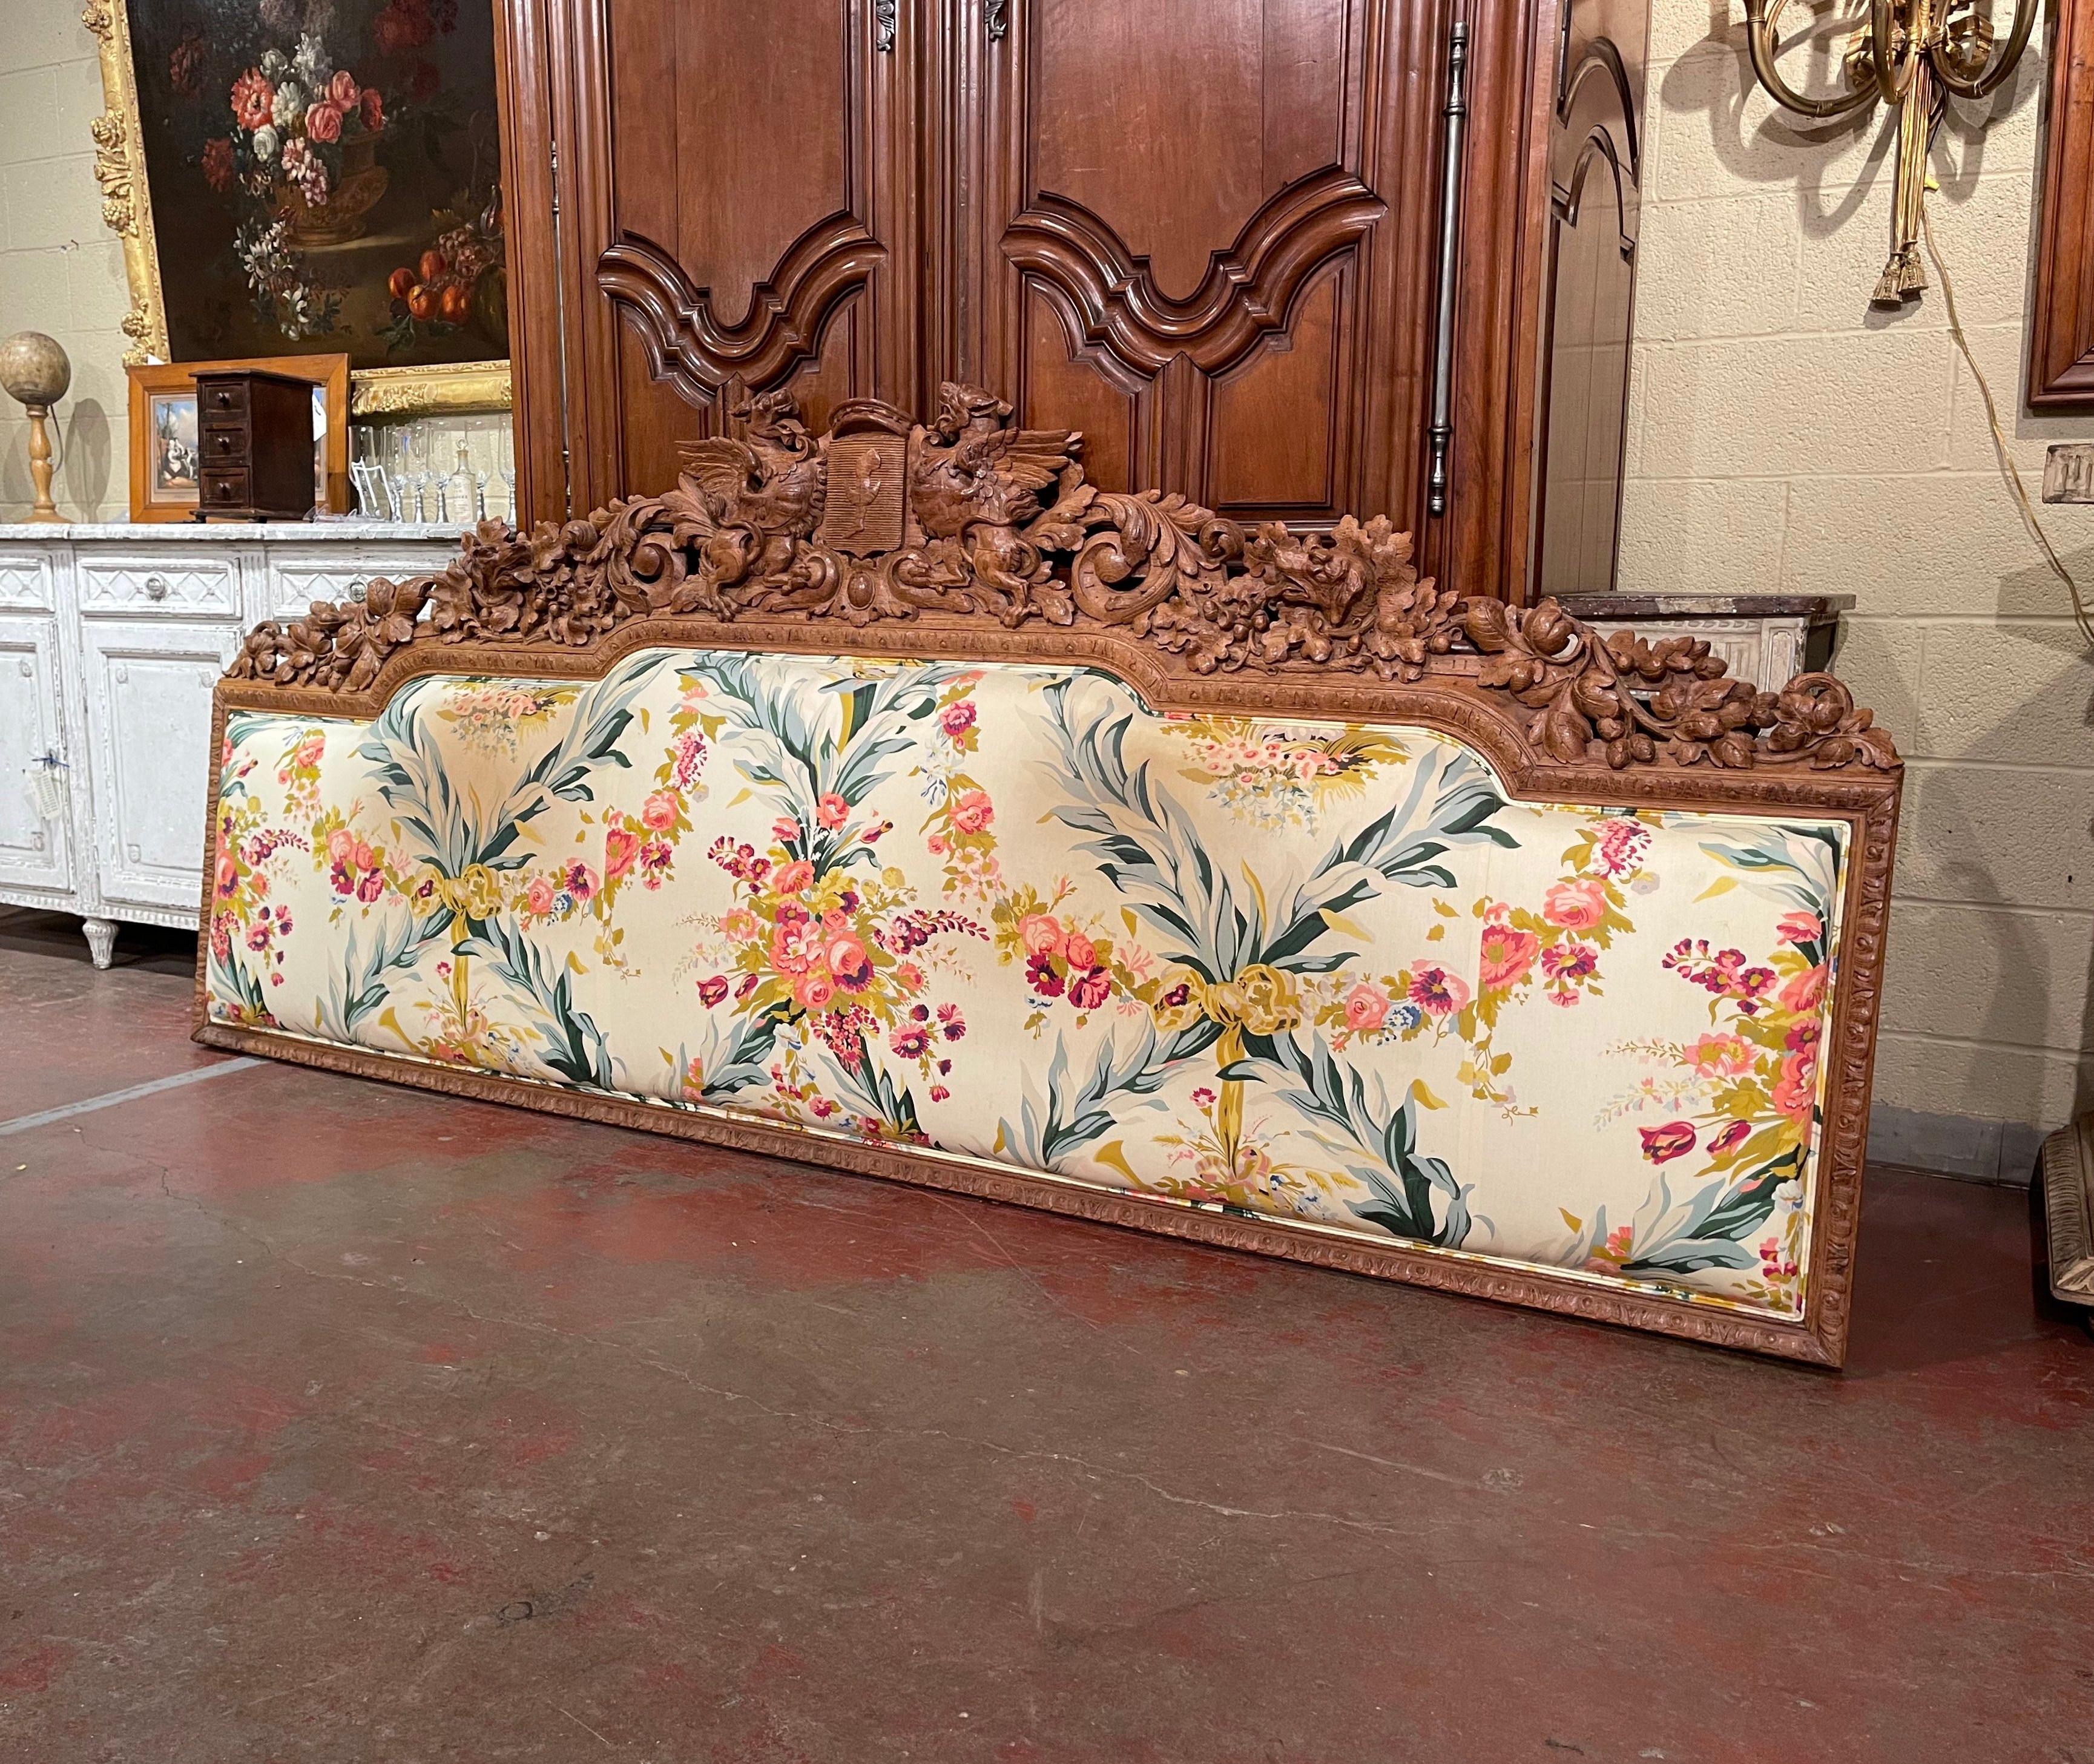 Decorate a master bedroom with this exquisite black forest headboard. Crafted in France circa 1860 and made of oak, the Gothic style wall hanging frame features heavily carvings throughout including hand carved acorn, acanthus leaf, and dog head